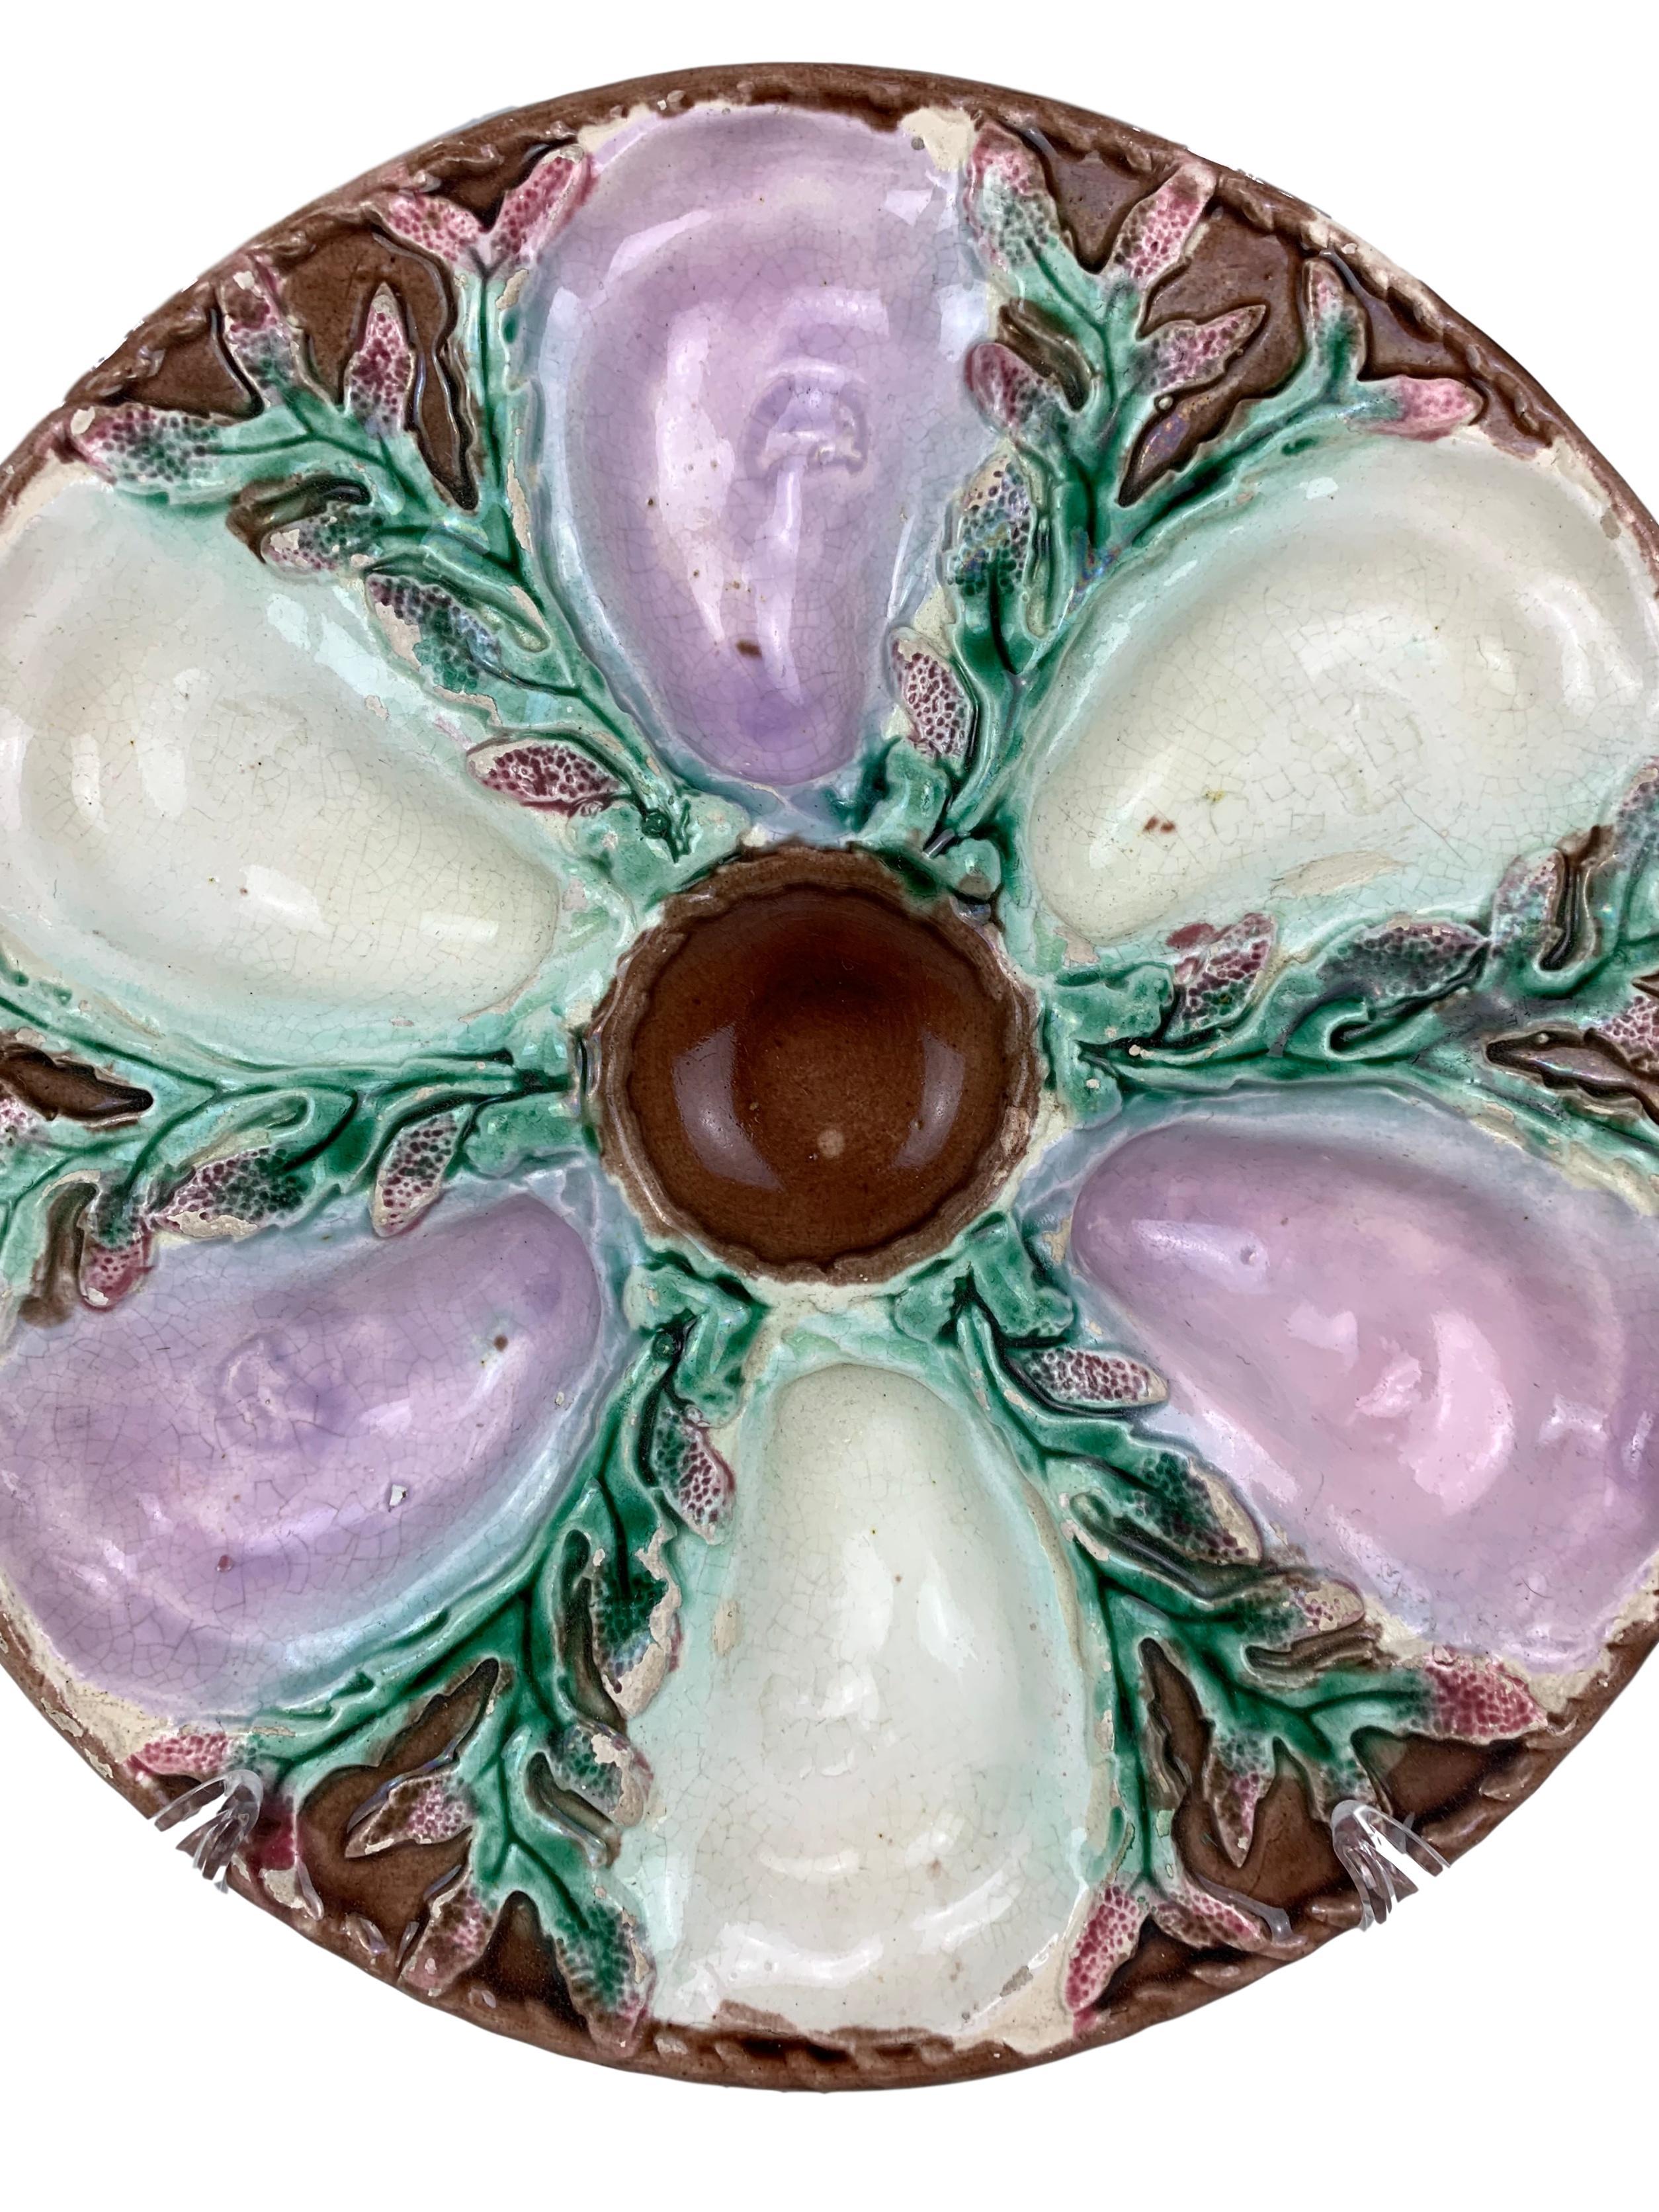 19th century Majolica oyster plate by Simon Fielding, English, circa 1880.

For over 28 years we have been among the nation's preeminent specialists in fine antique majolica.